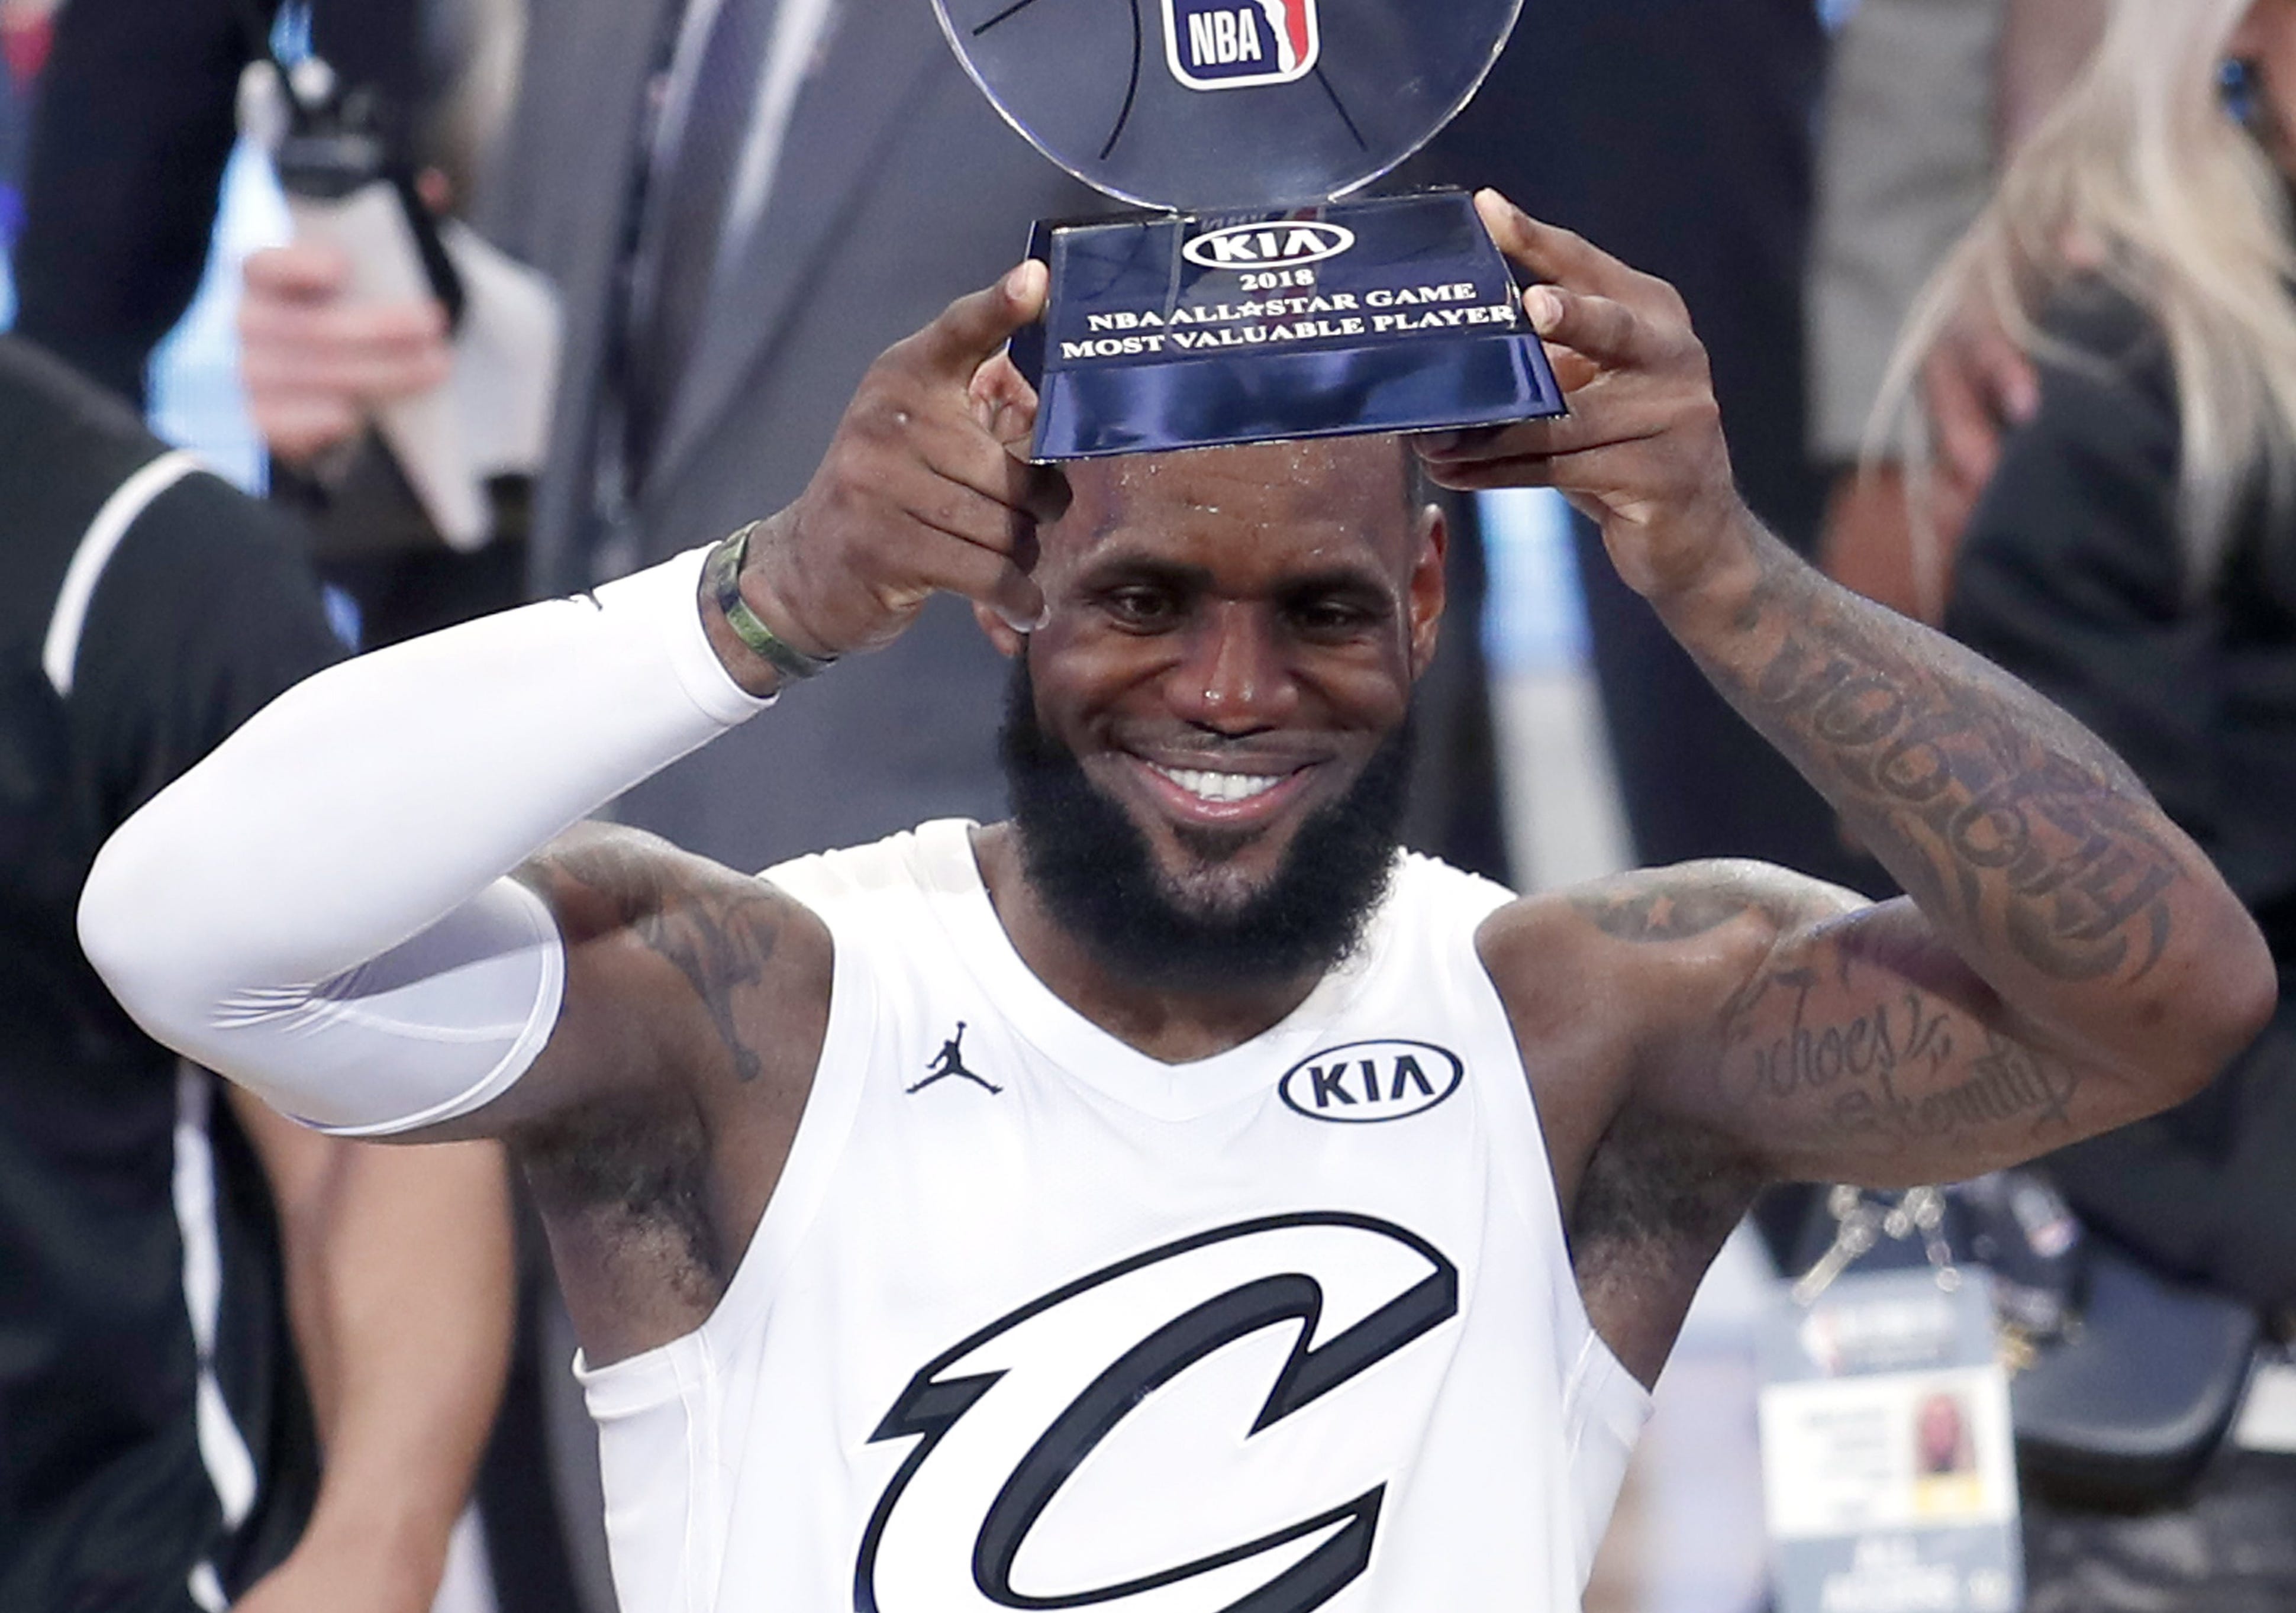 LeBron James shared 2018 All-Star MVP with his kids